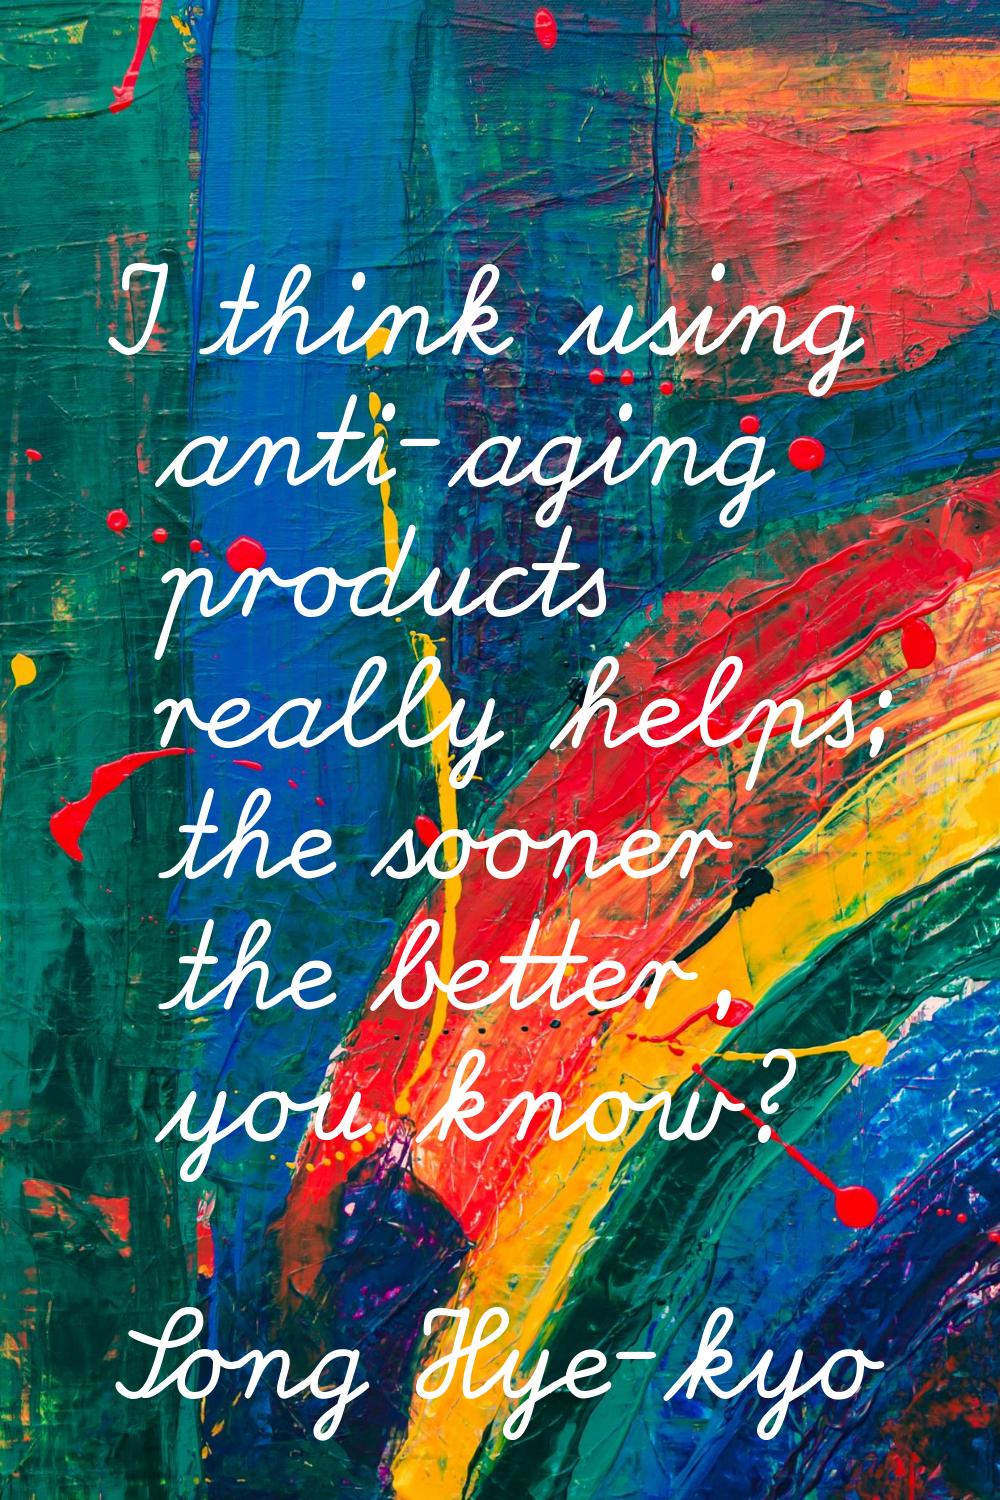 I think using anti-aging products really helps; the sooner the better, you know?